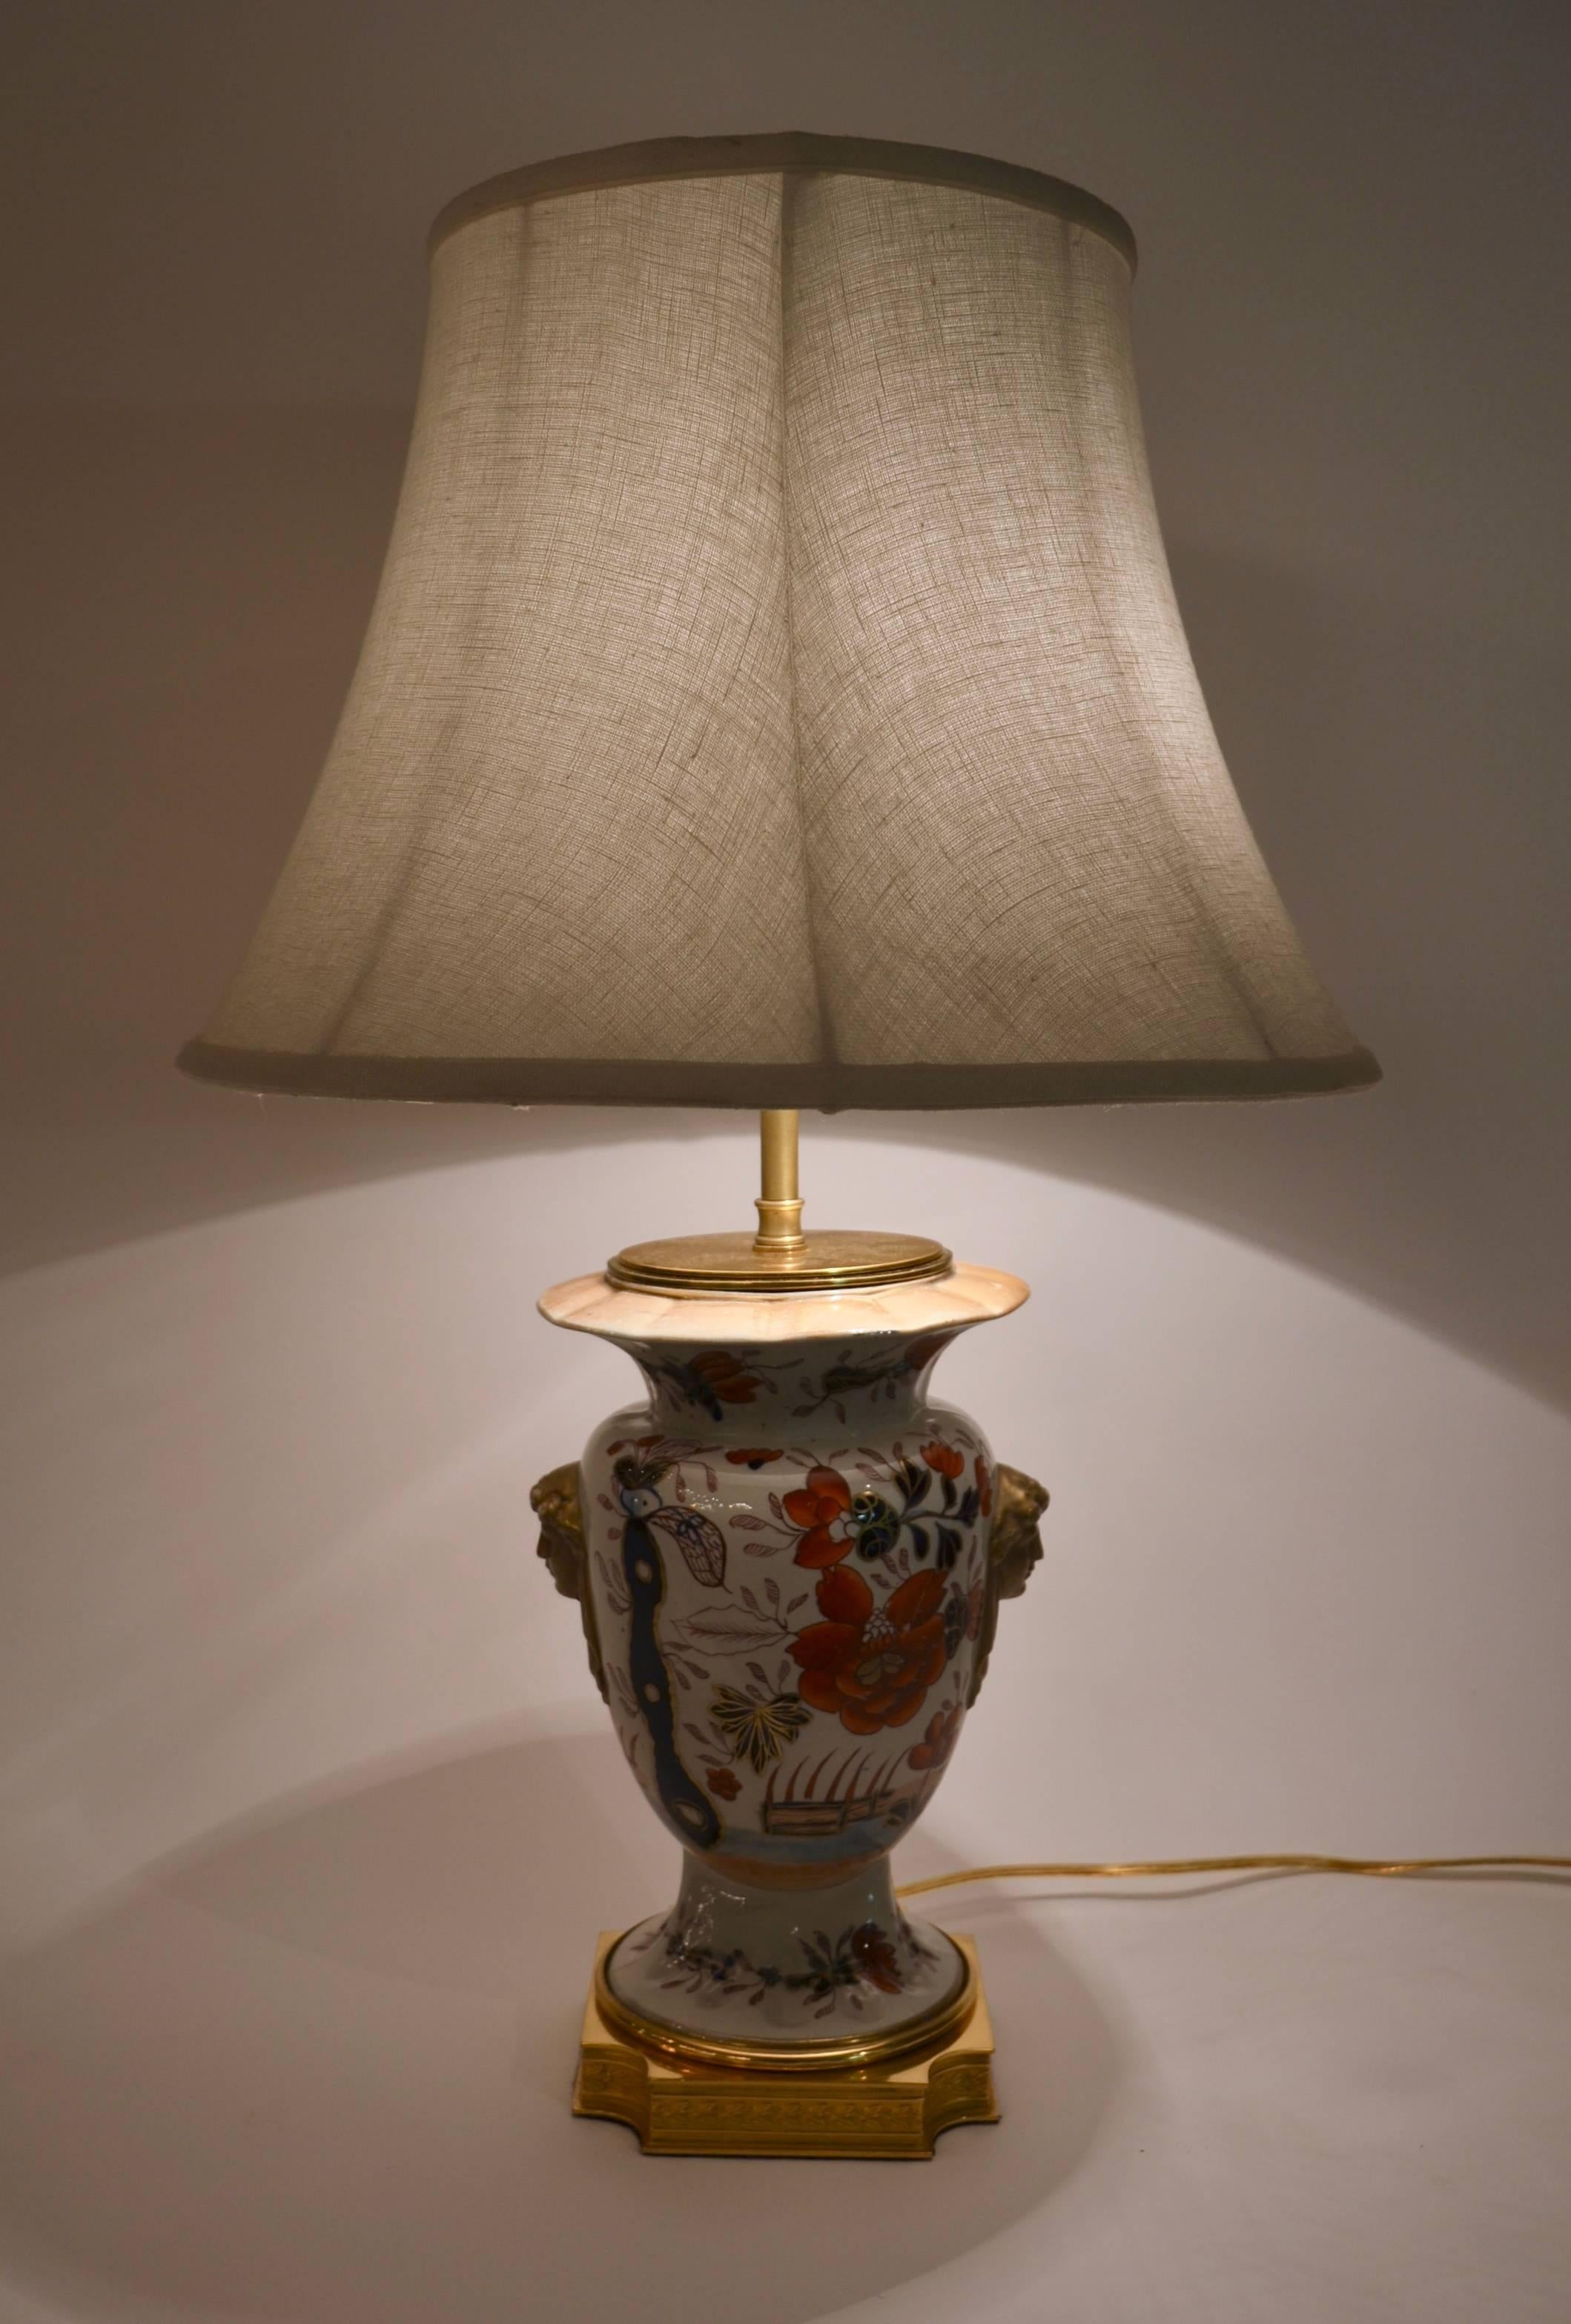 A wonderful lamp with good detail and fine coloring.